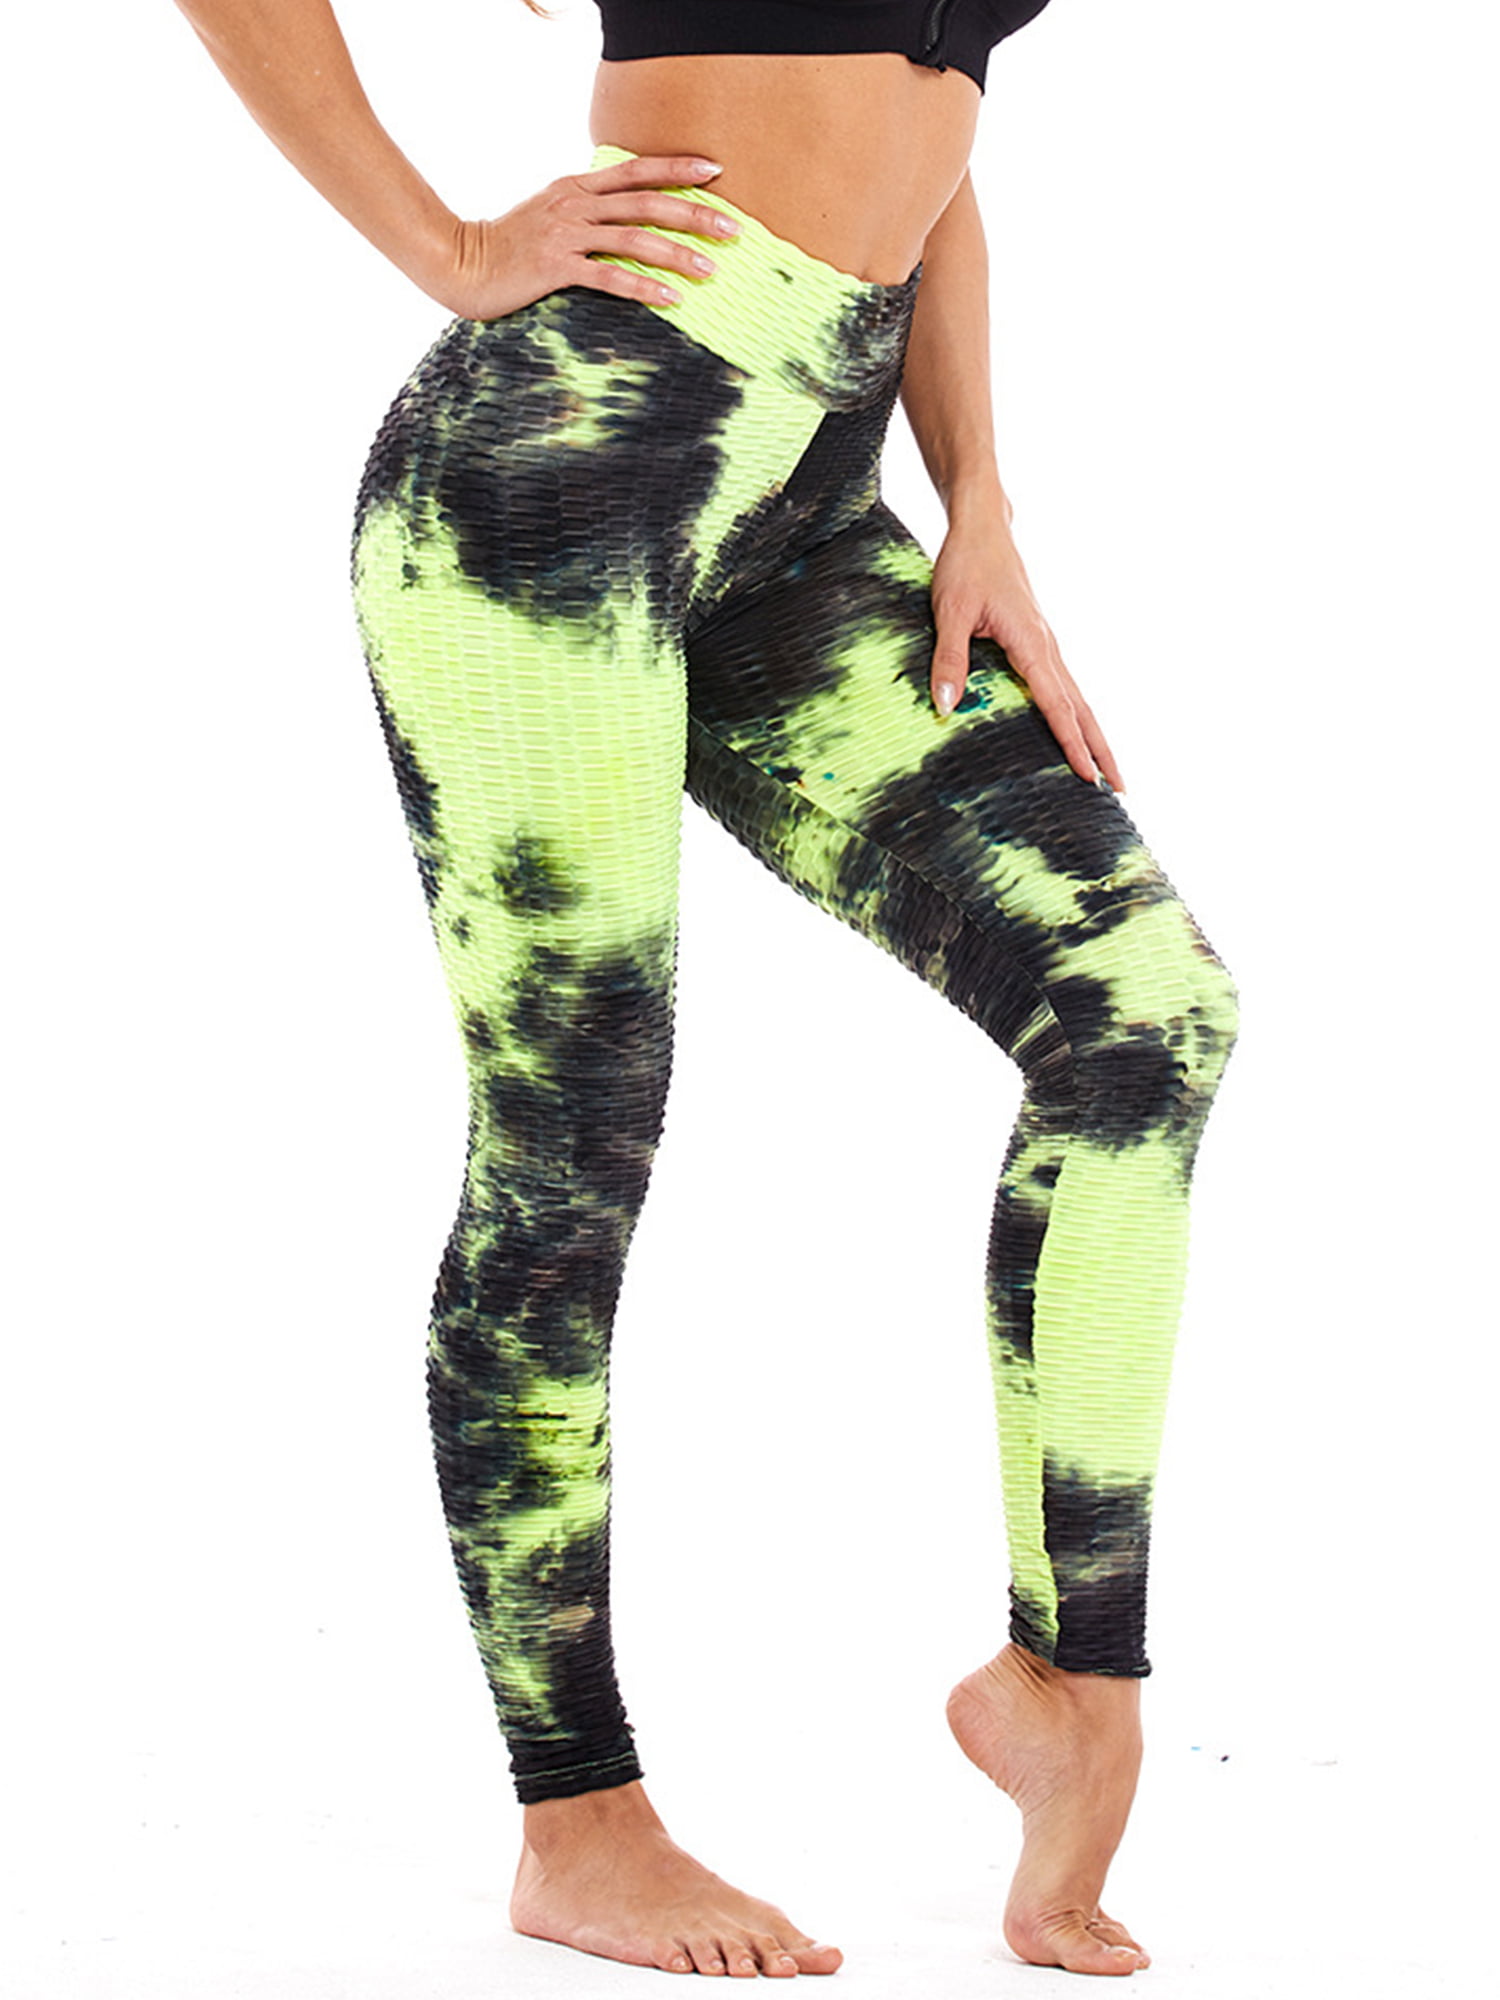 Tracksuit Army Camouflage  Sports Jogging Running Walk Gym Yoga Indoor Women 